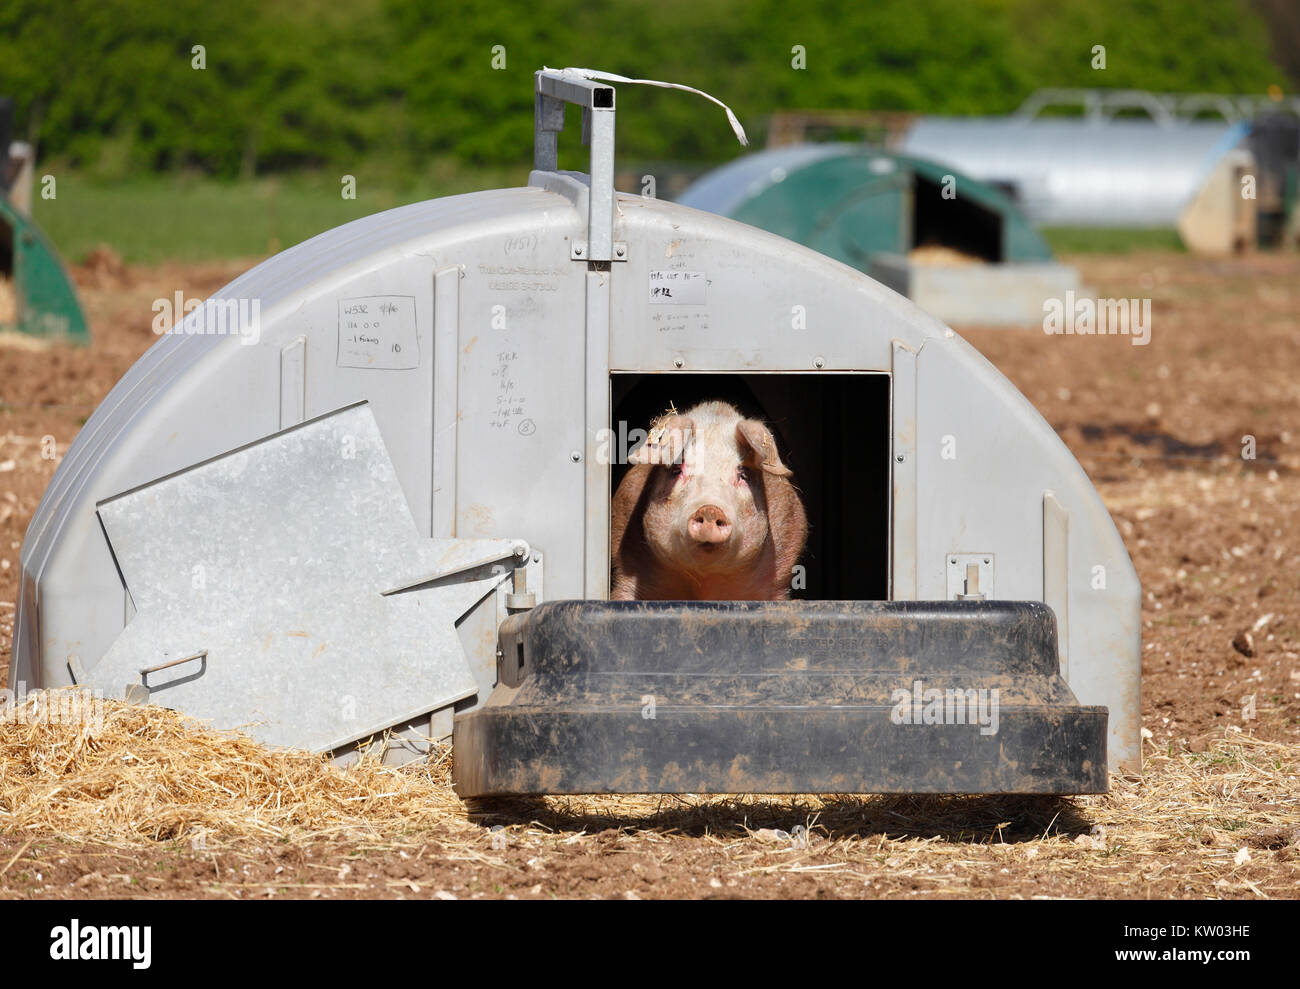 Pig in a sty on an outdoor pig farm. Stock Photo